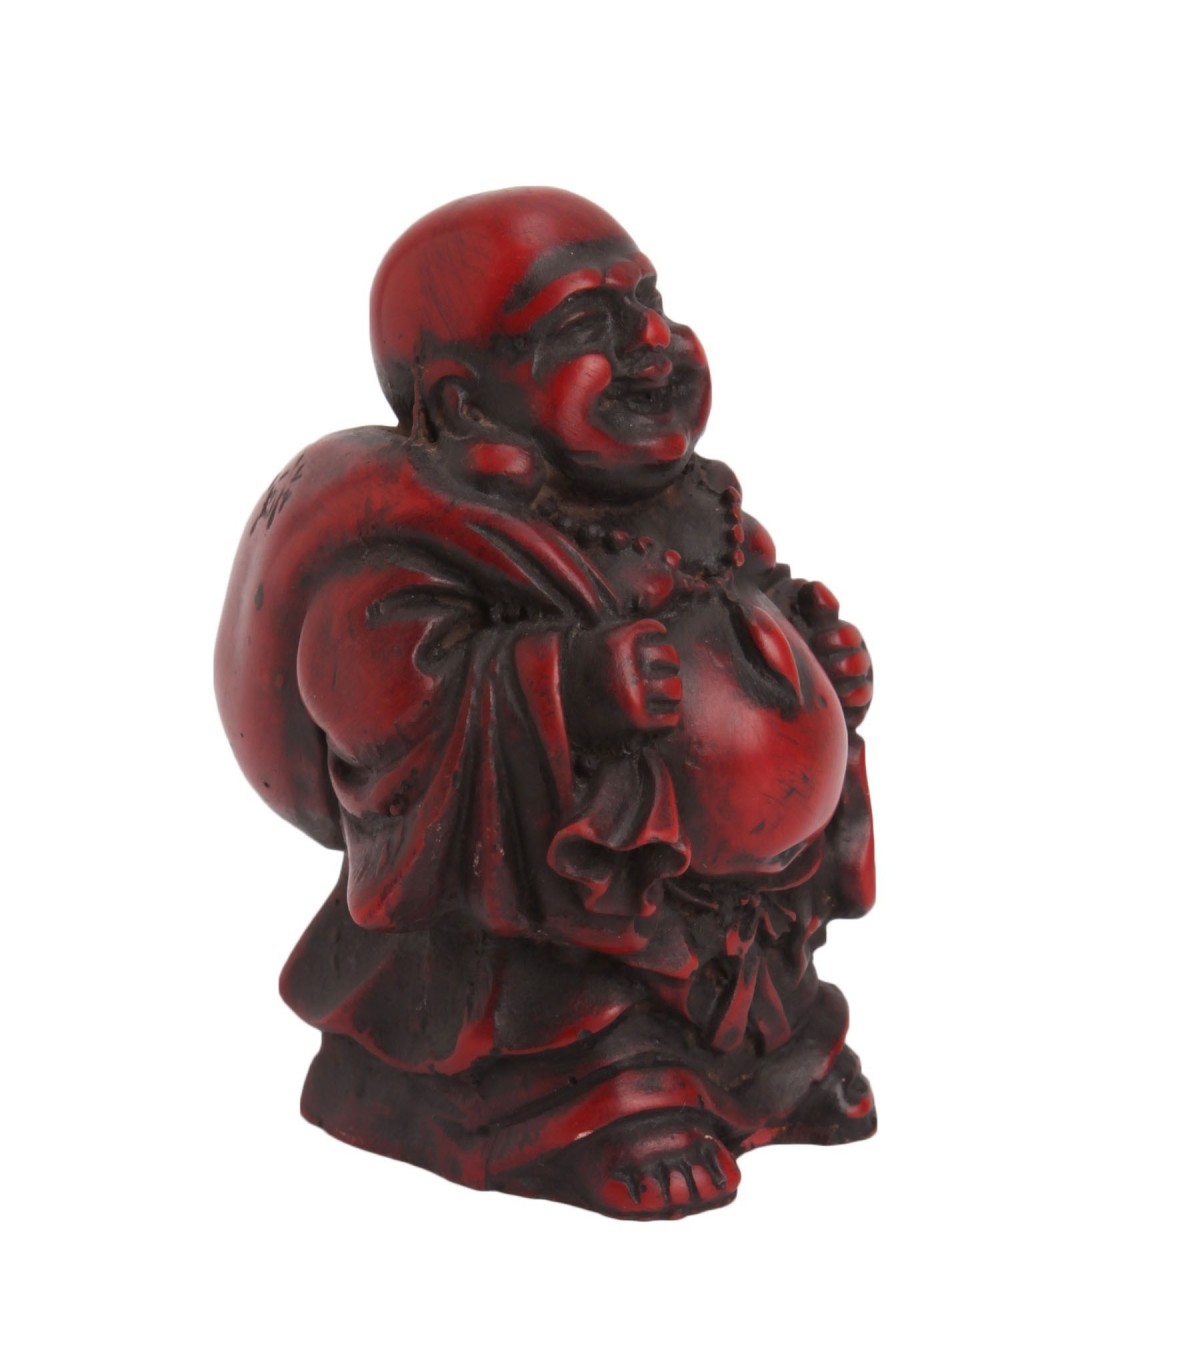 Laughing Buddha Carrying A Sack Of Good Fortune| Buy Statues Online